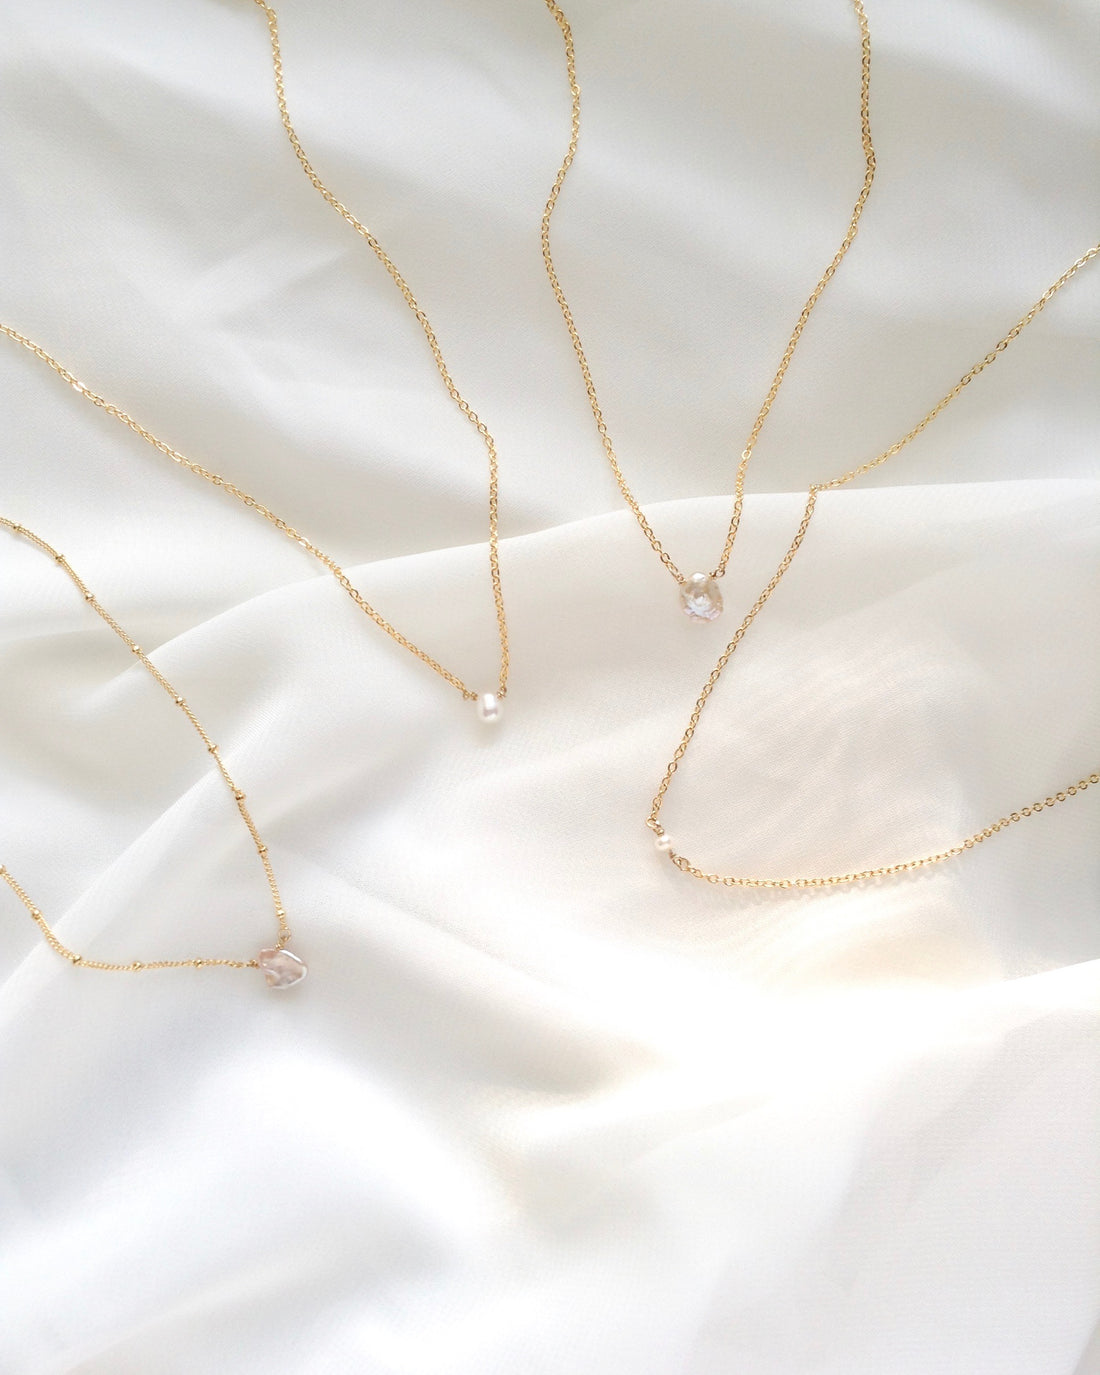 Dainty Pearl Necklace | Simple Delicate Everyday Jewelry | IB Jewelry